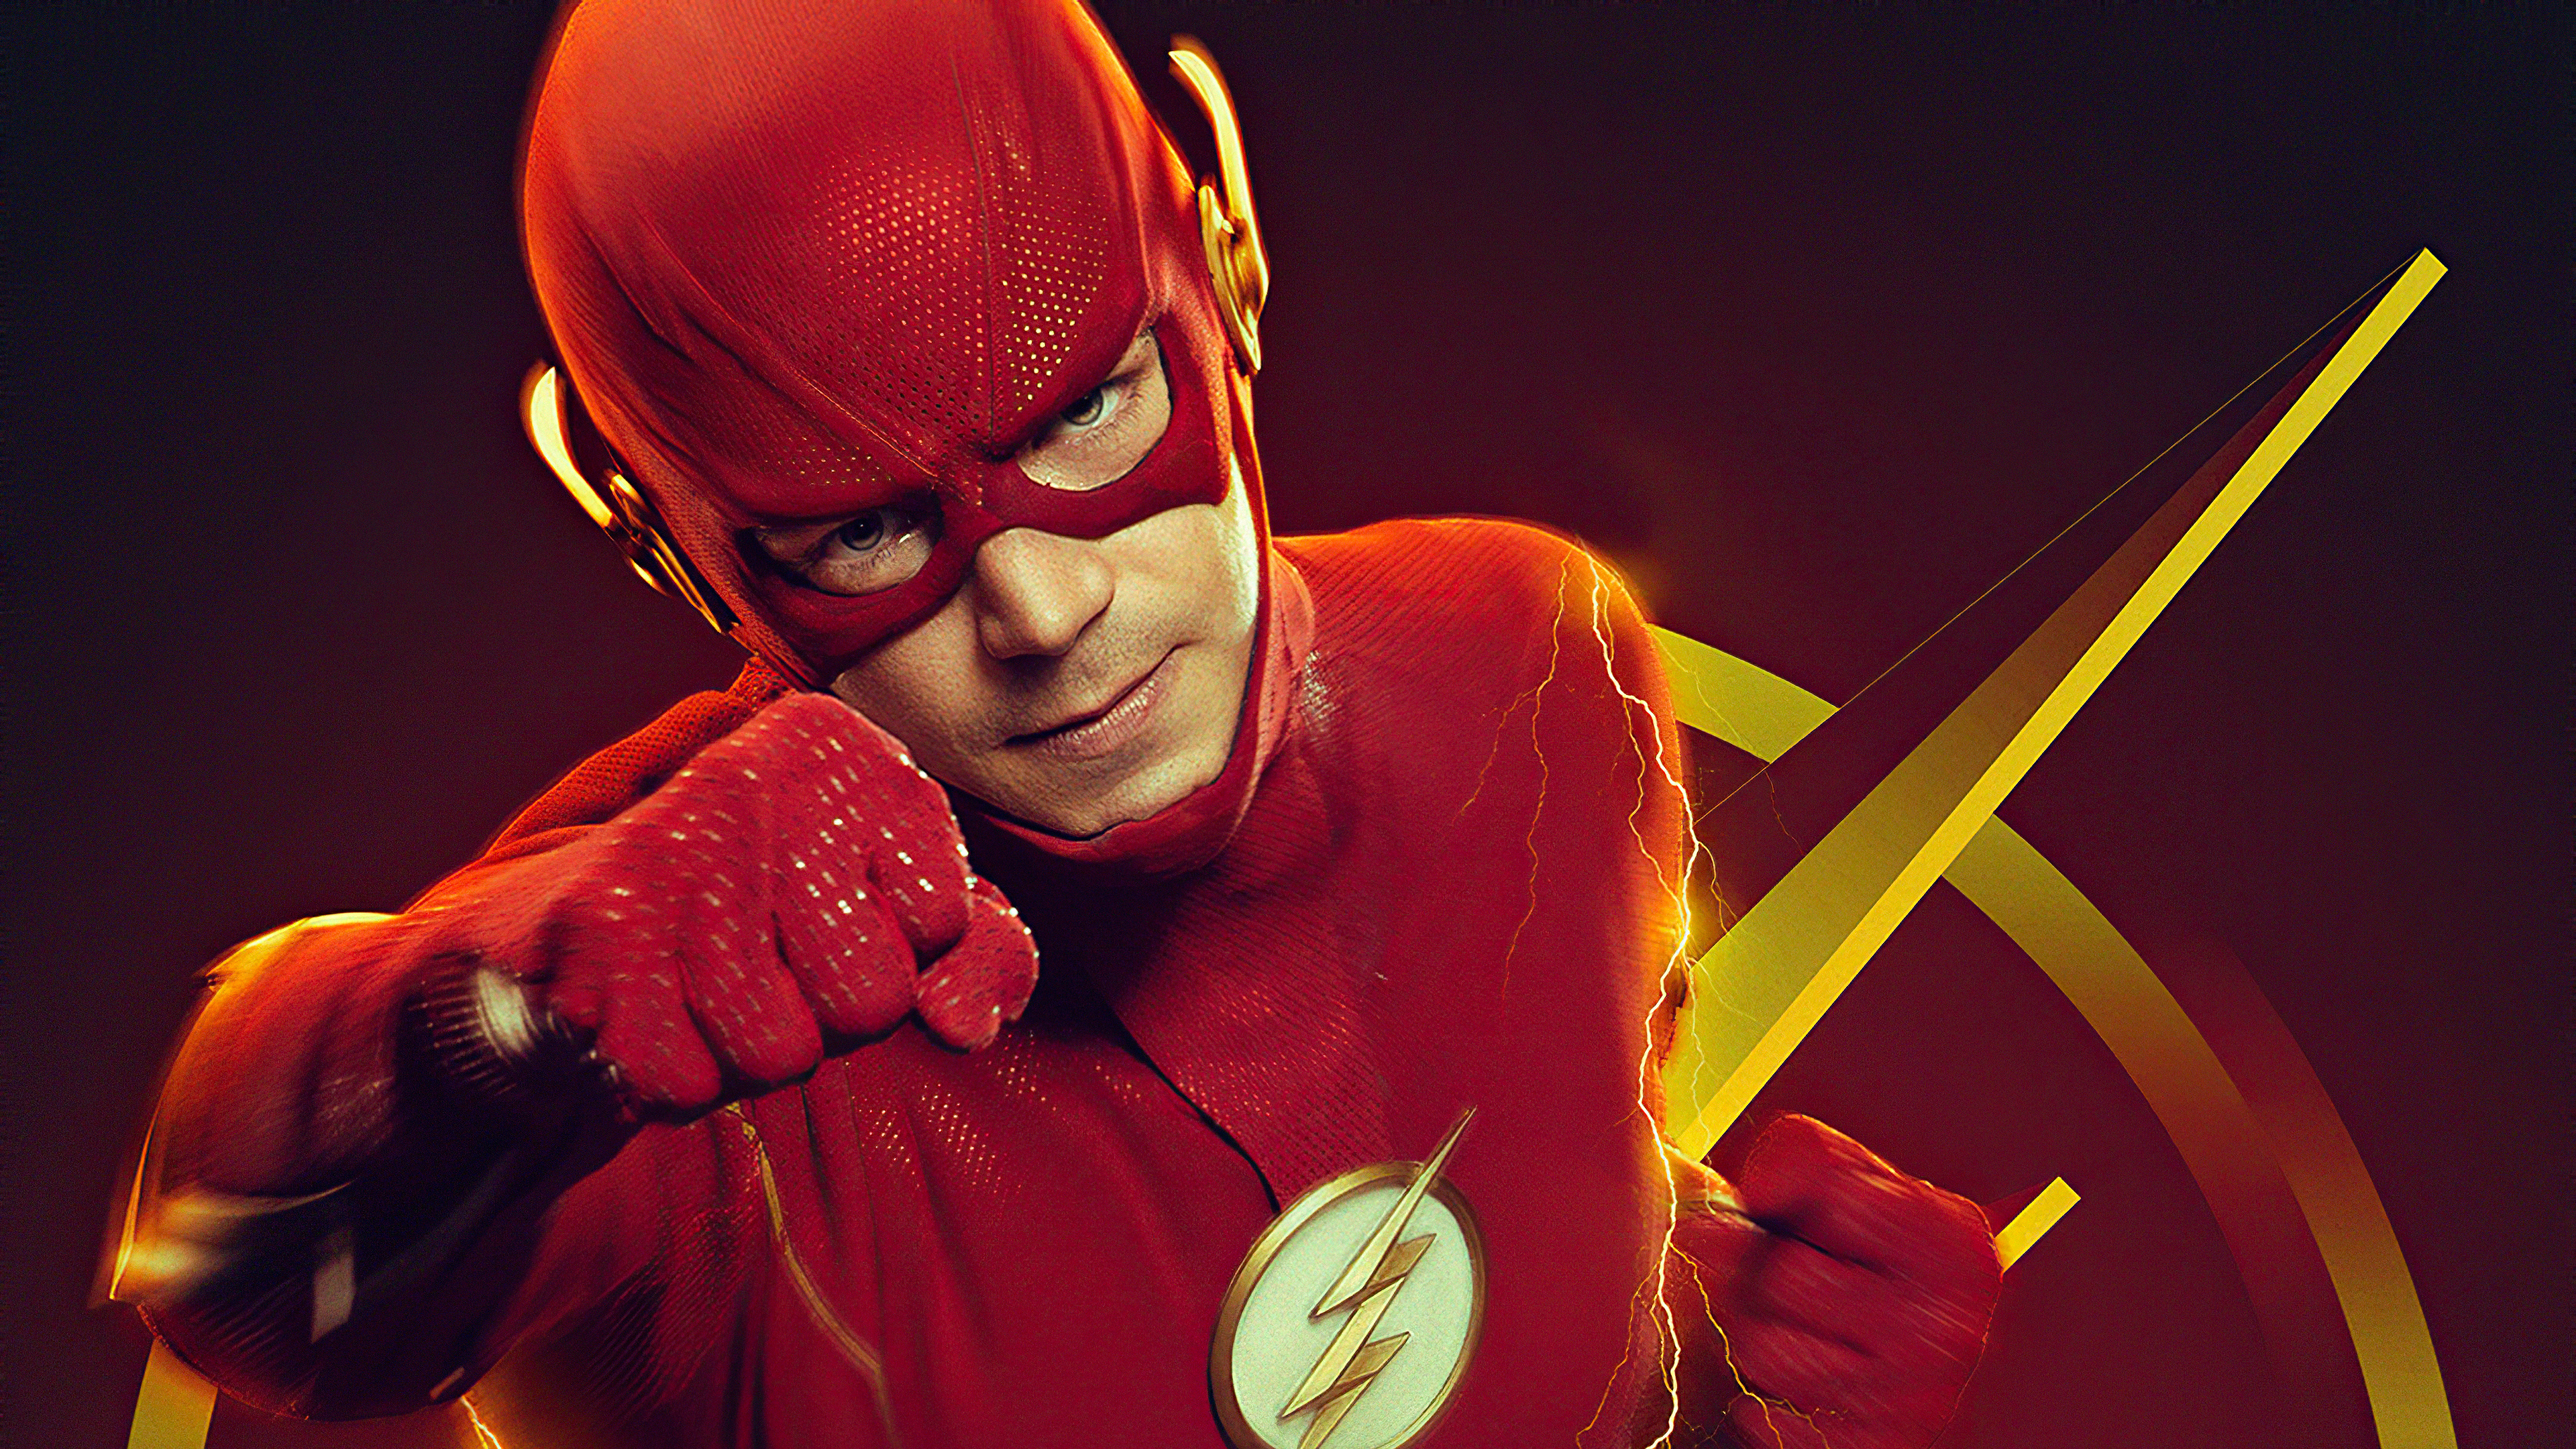 Grant Gustin: An American television series based on the Barry Allen incarnation of DC Comics character the Flash. 3840x2160 4K Wallpaper.